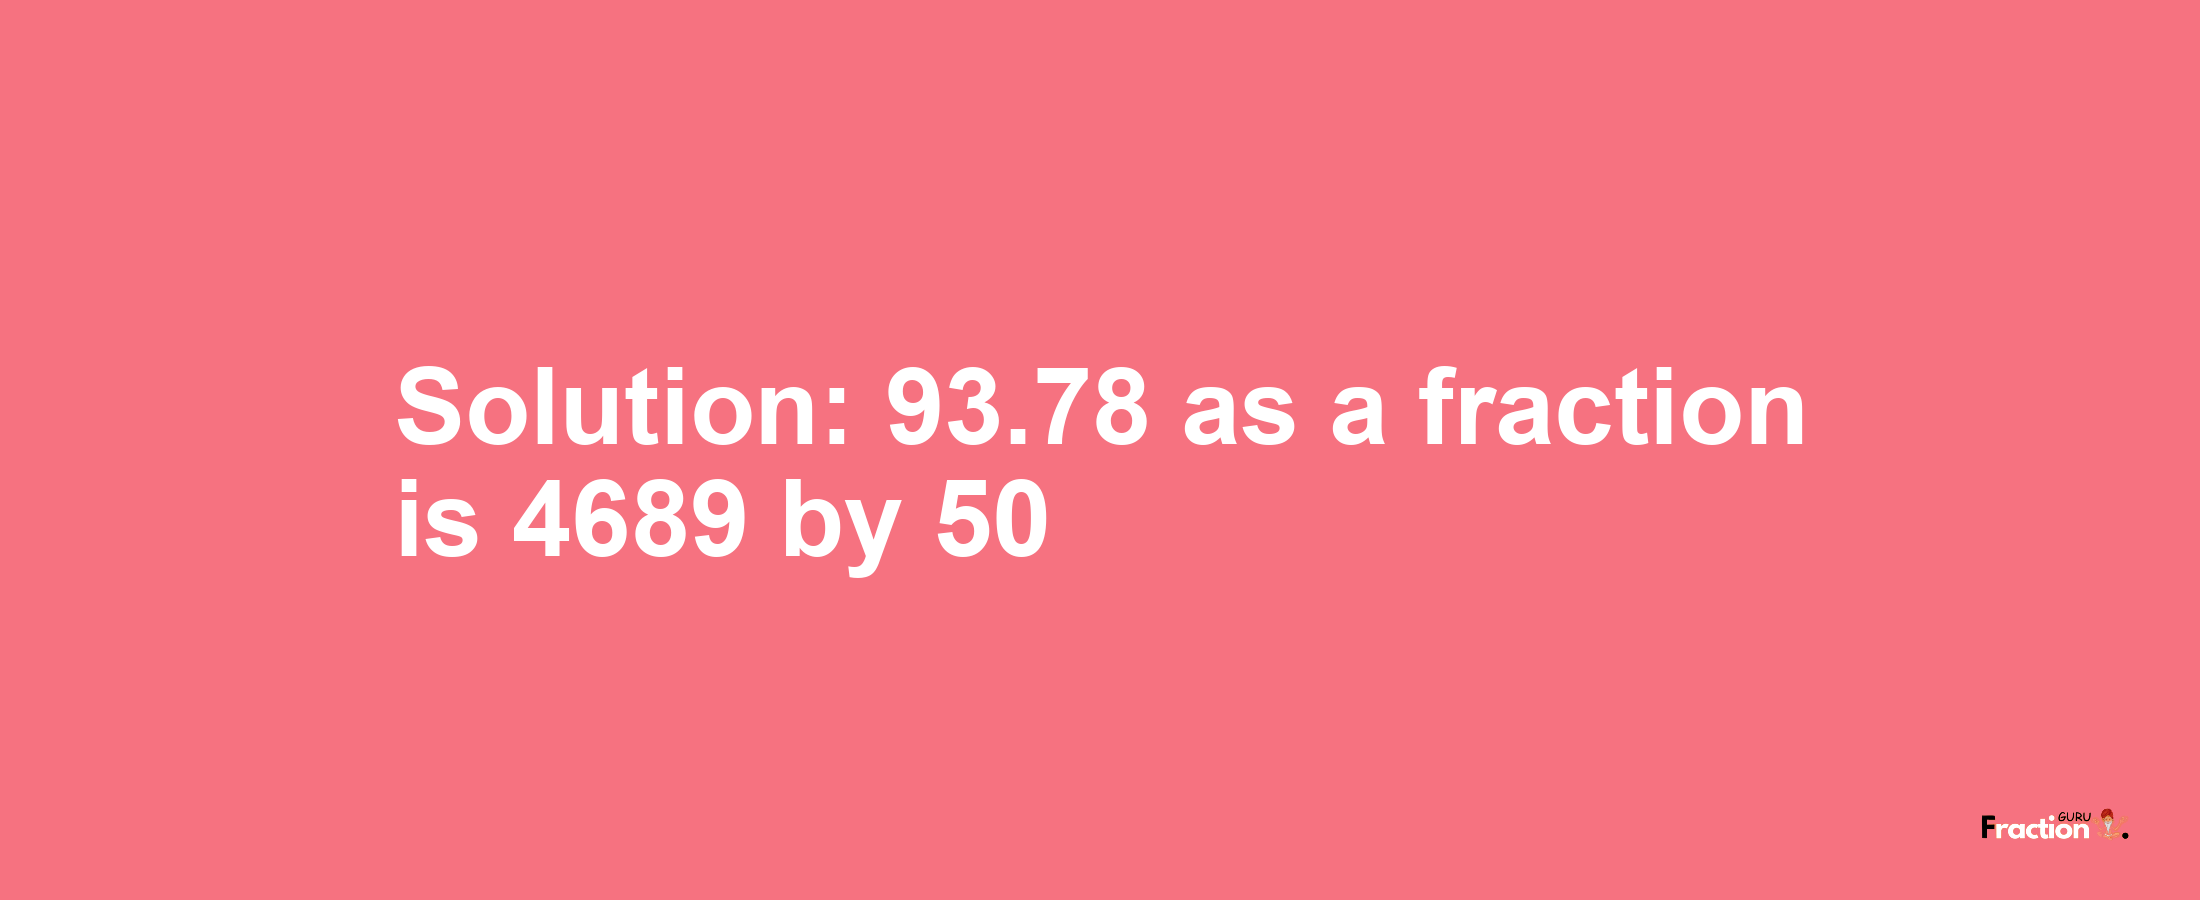 Solution:93.78 as a fraction is 4689/50